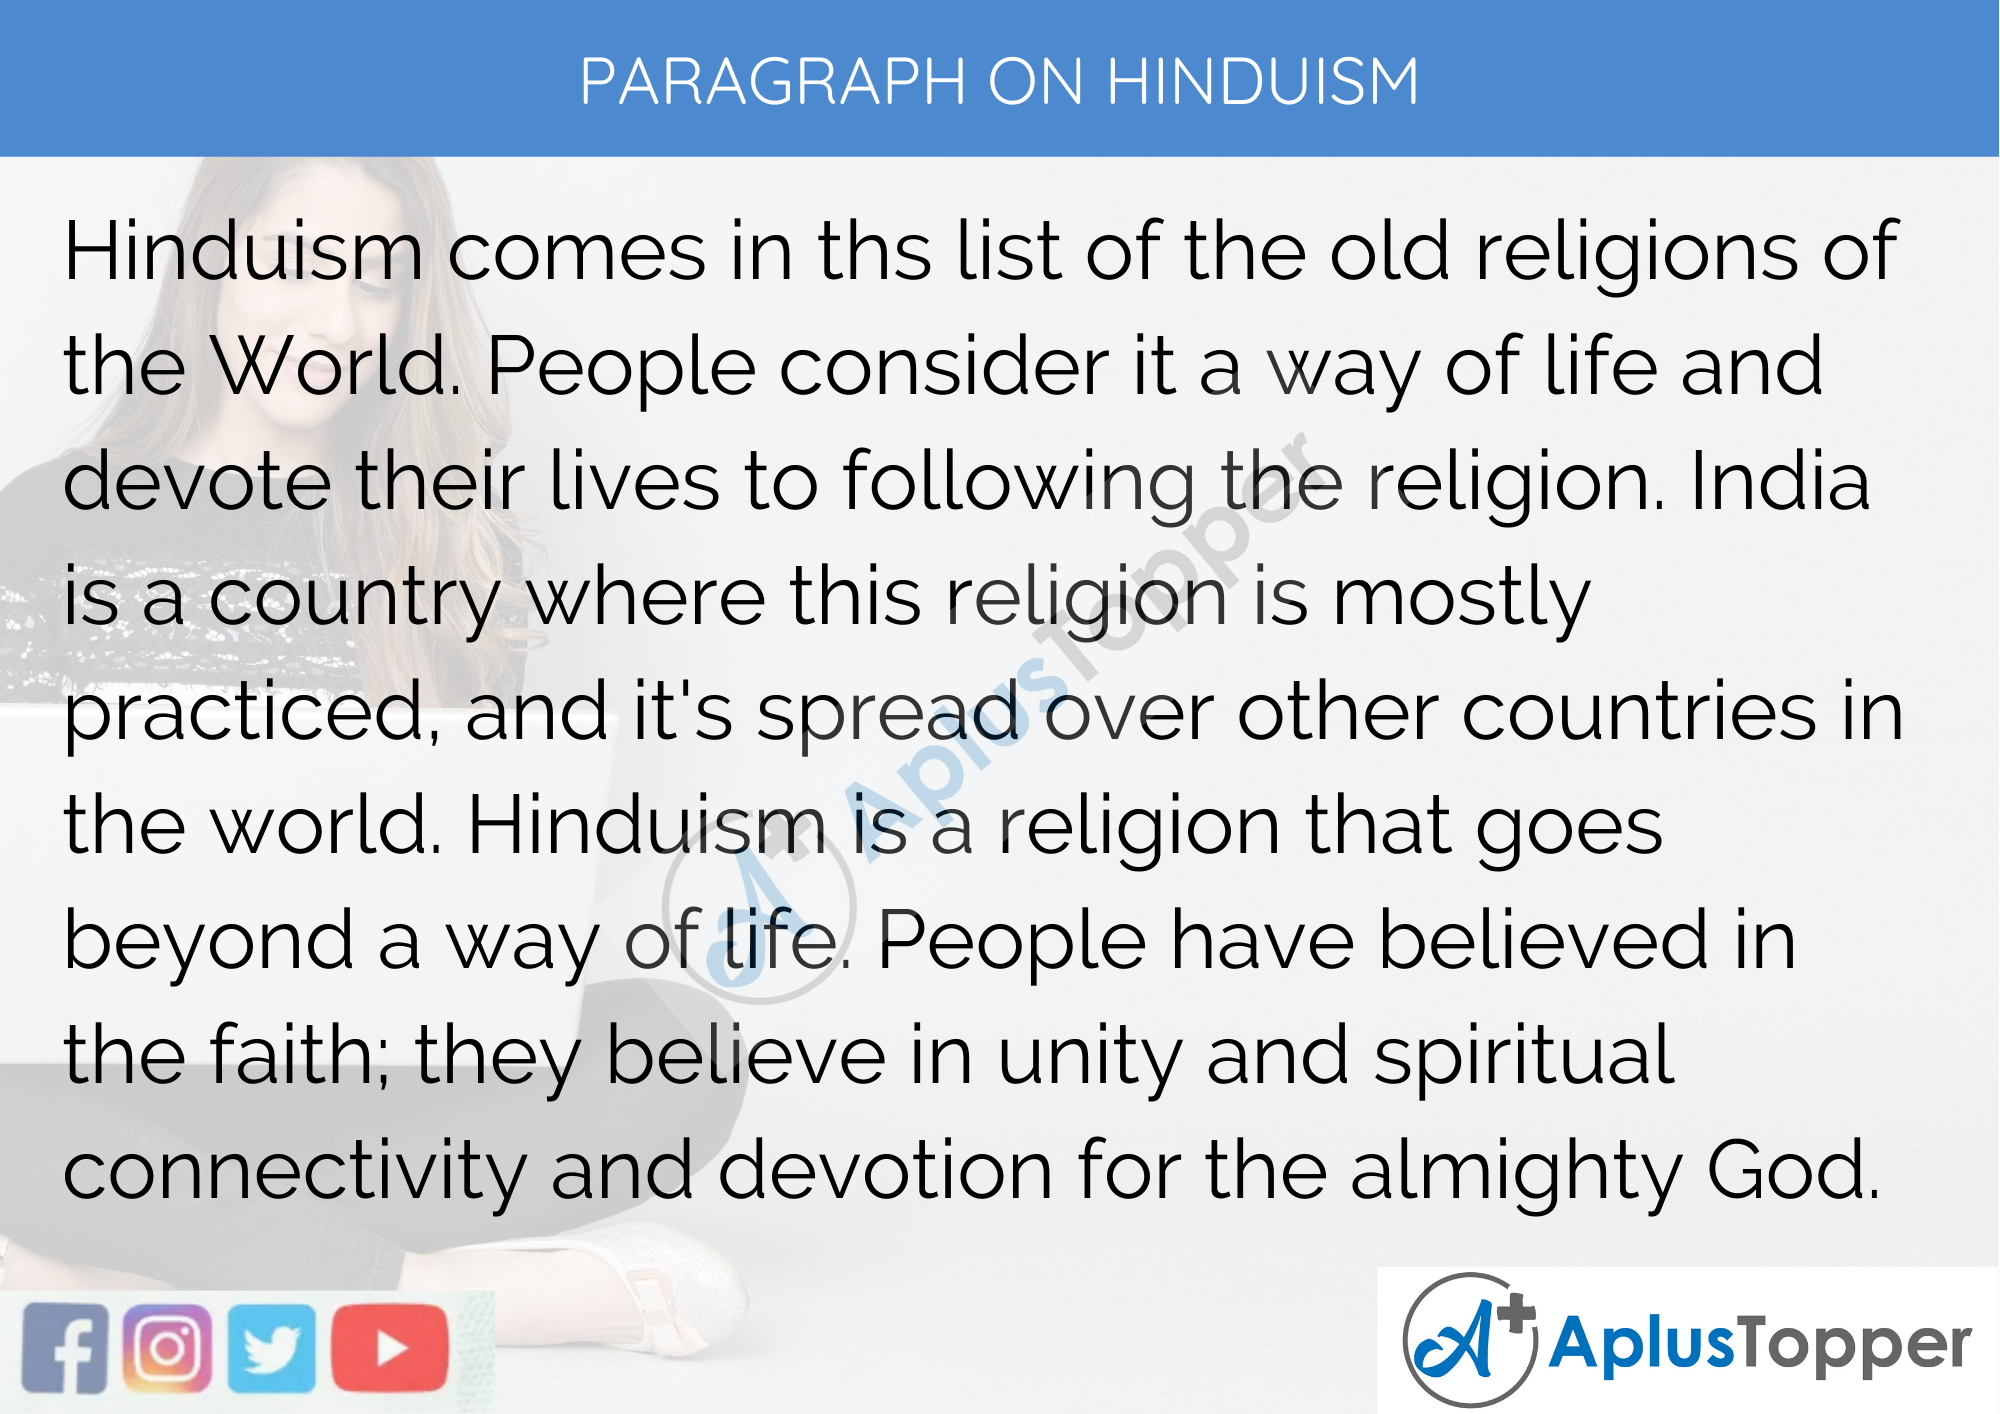 Paragraph on Hinduism - 100 Words for Classes 1, 2, 3 Kids